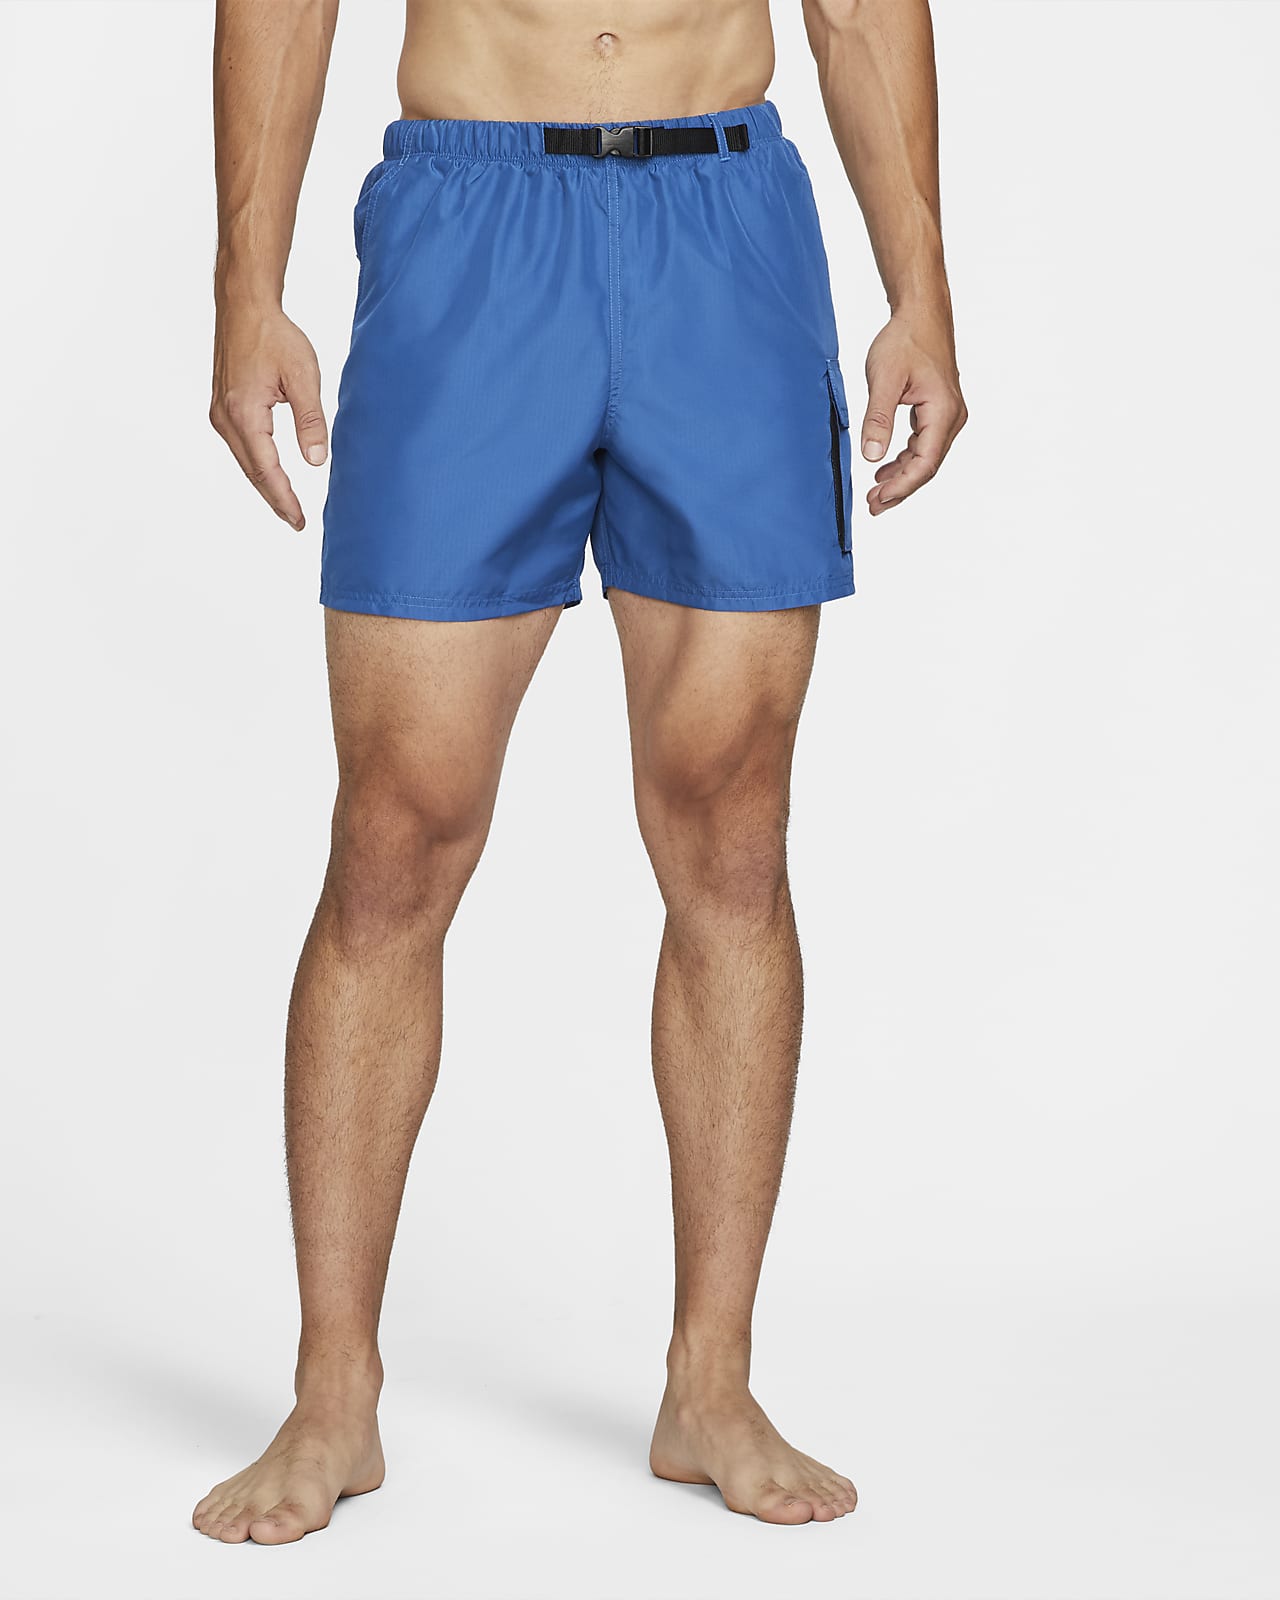 Nike Men's 13cm (approx.) Belted Packable Swimming Trunks